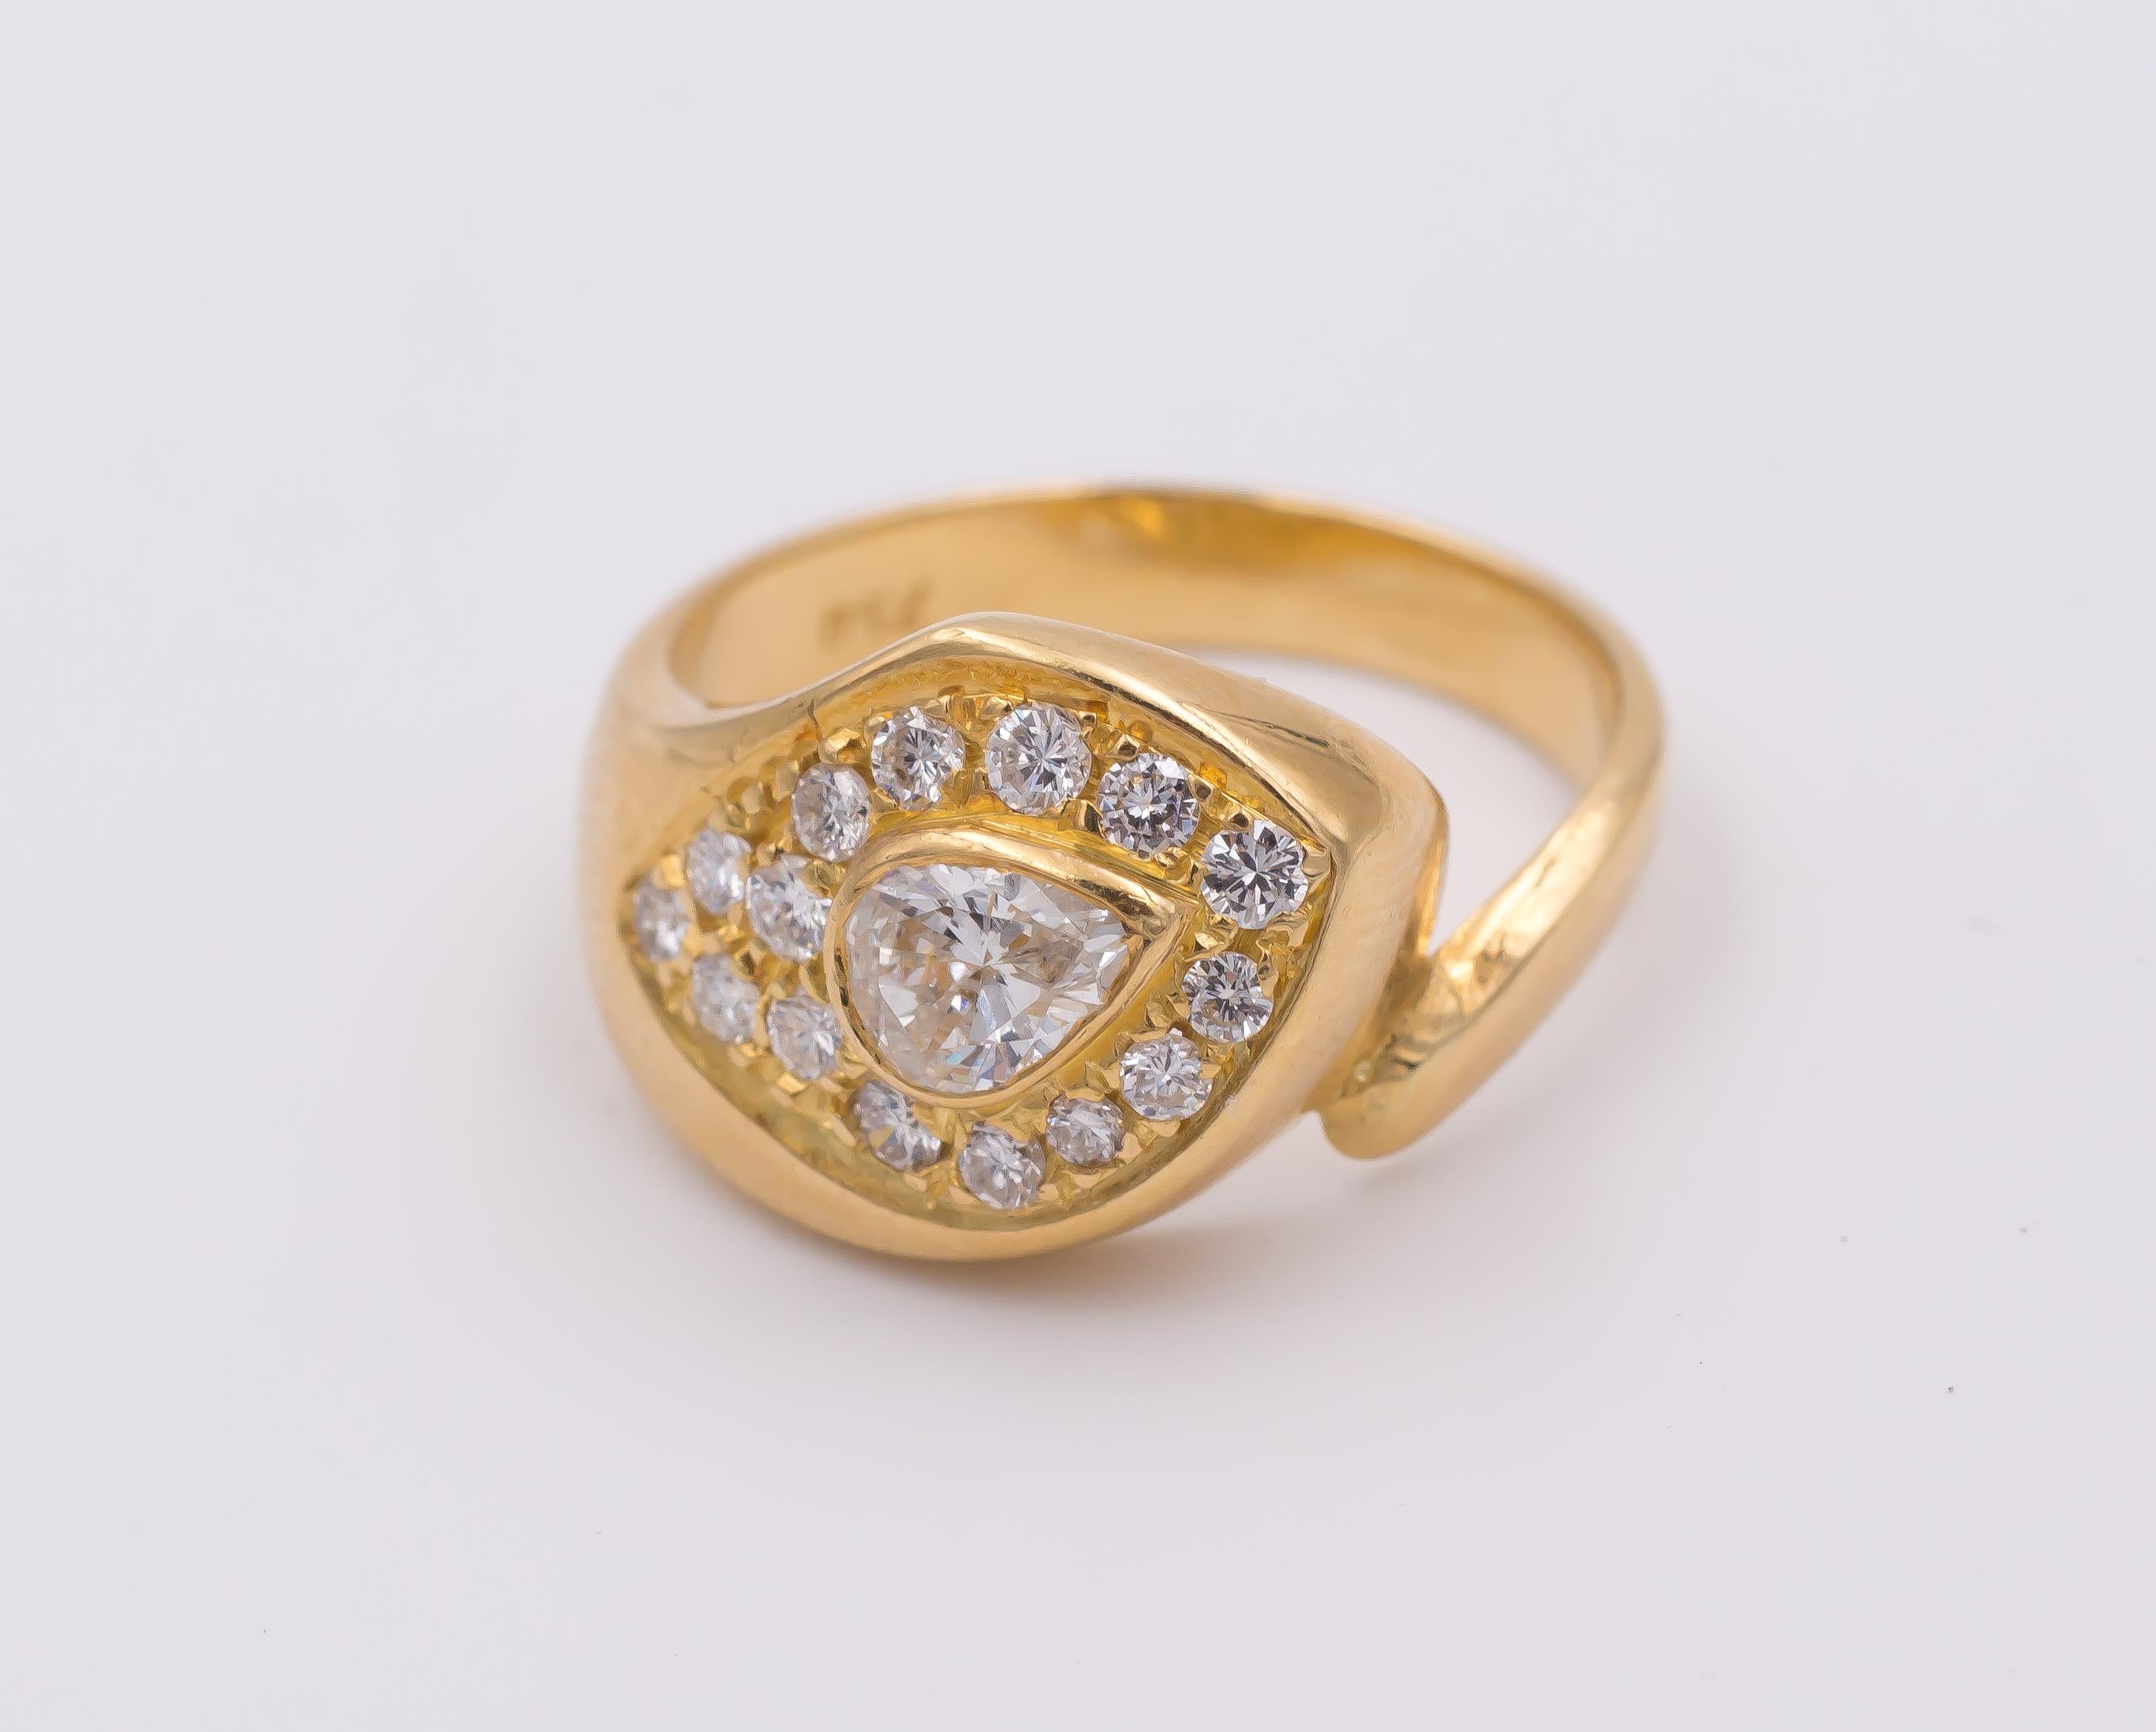 This beautiful vintage snake ring is crafted in yellow gold throughout and dates from the 1970s. It is set with a central diamond, surrounded by sixteen diamonds.  

MATERIALS
Gold and diamonds

RING SIZE
6½ US (resizable)